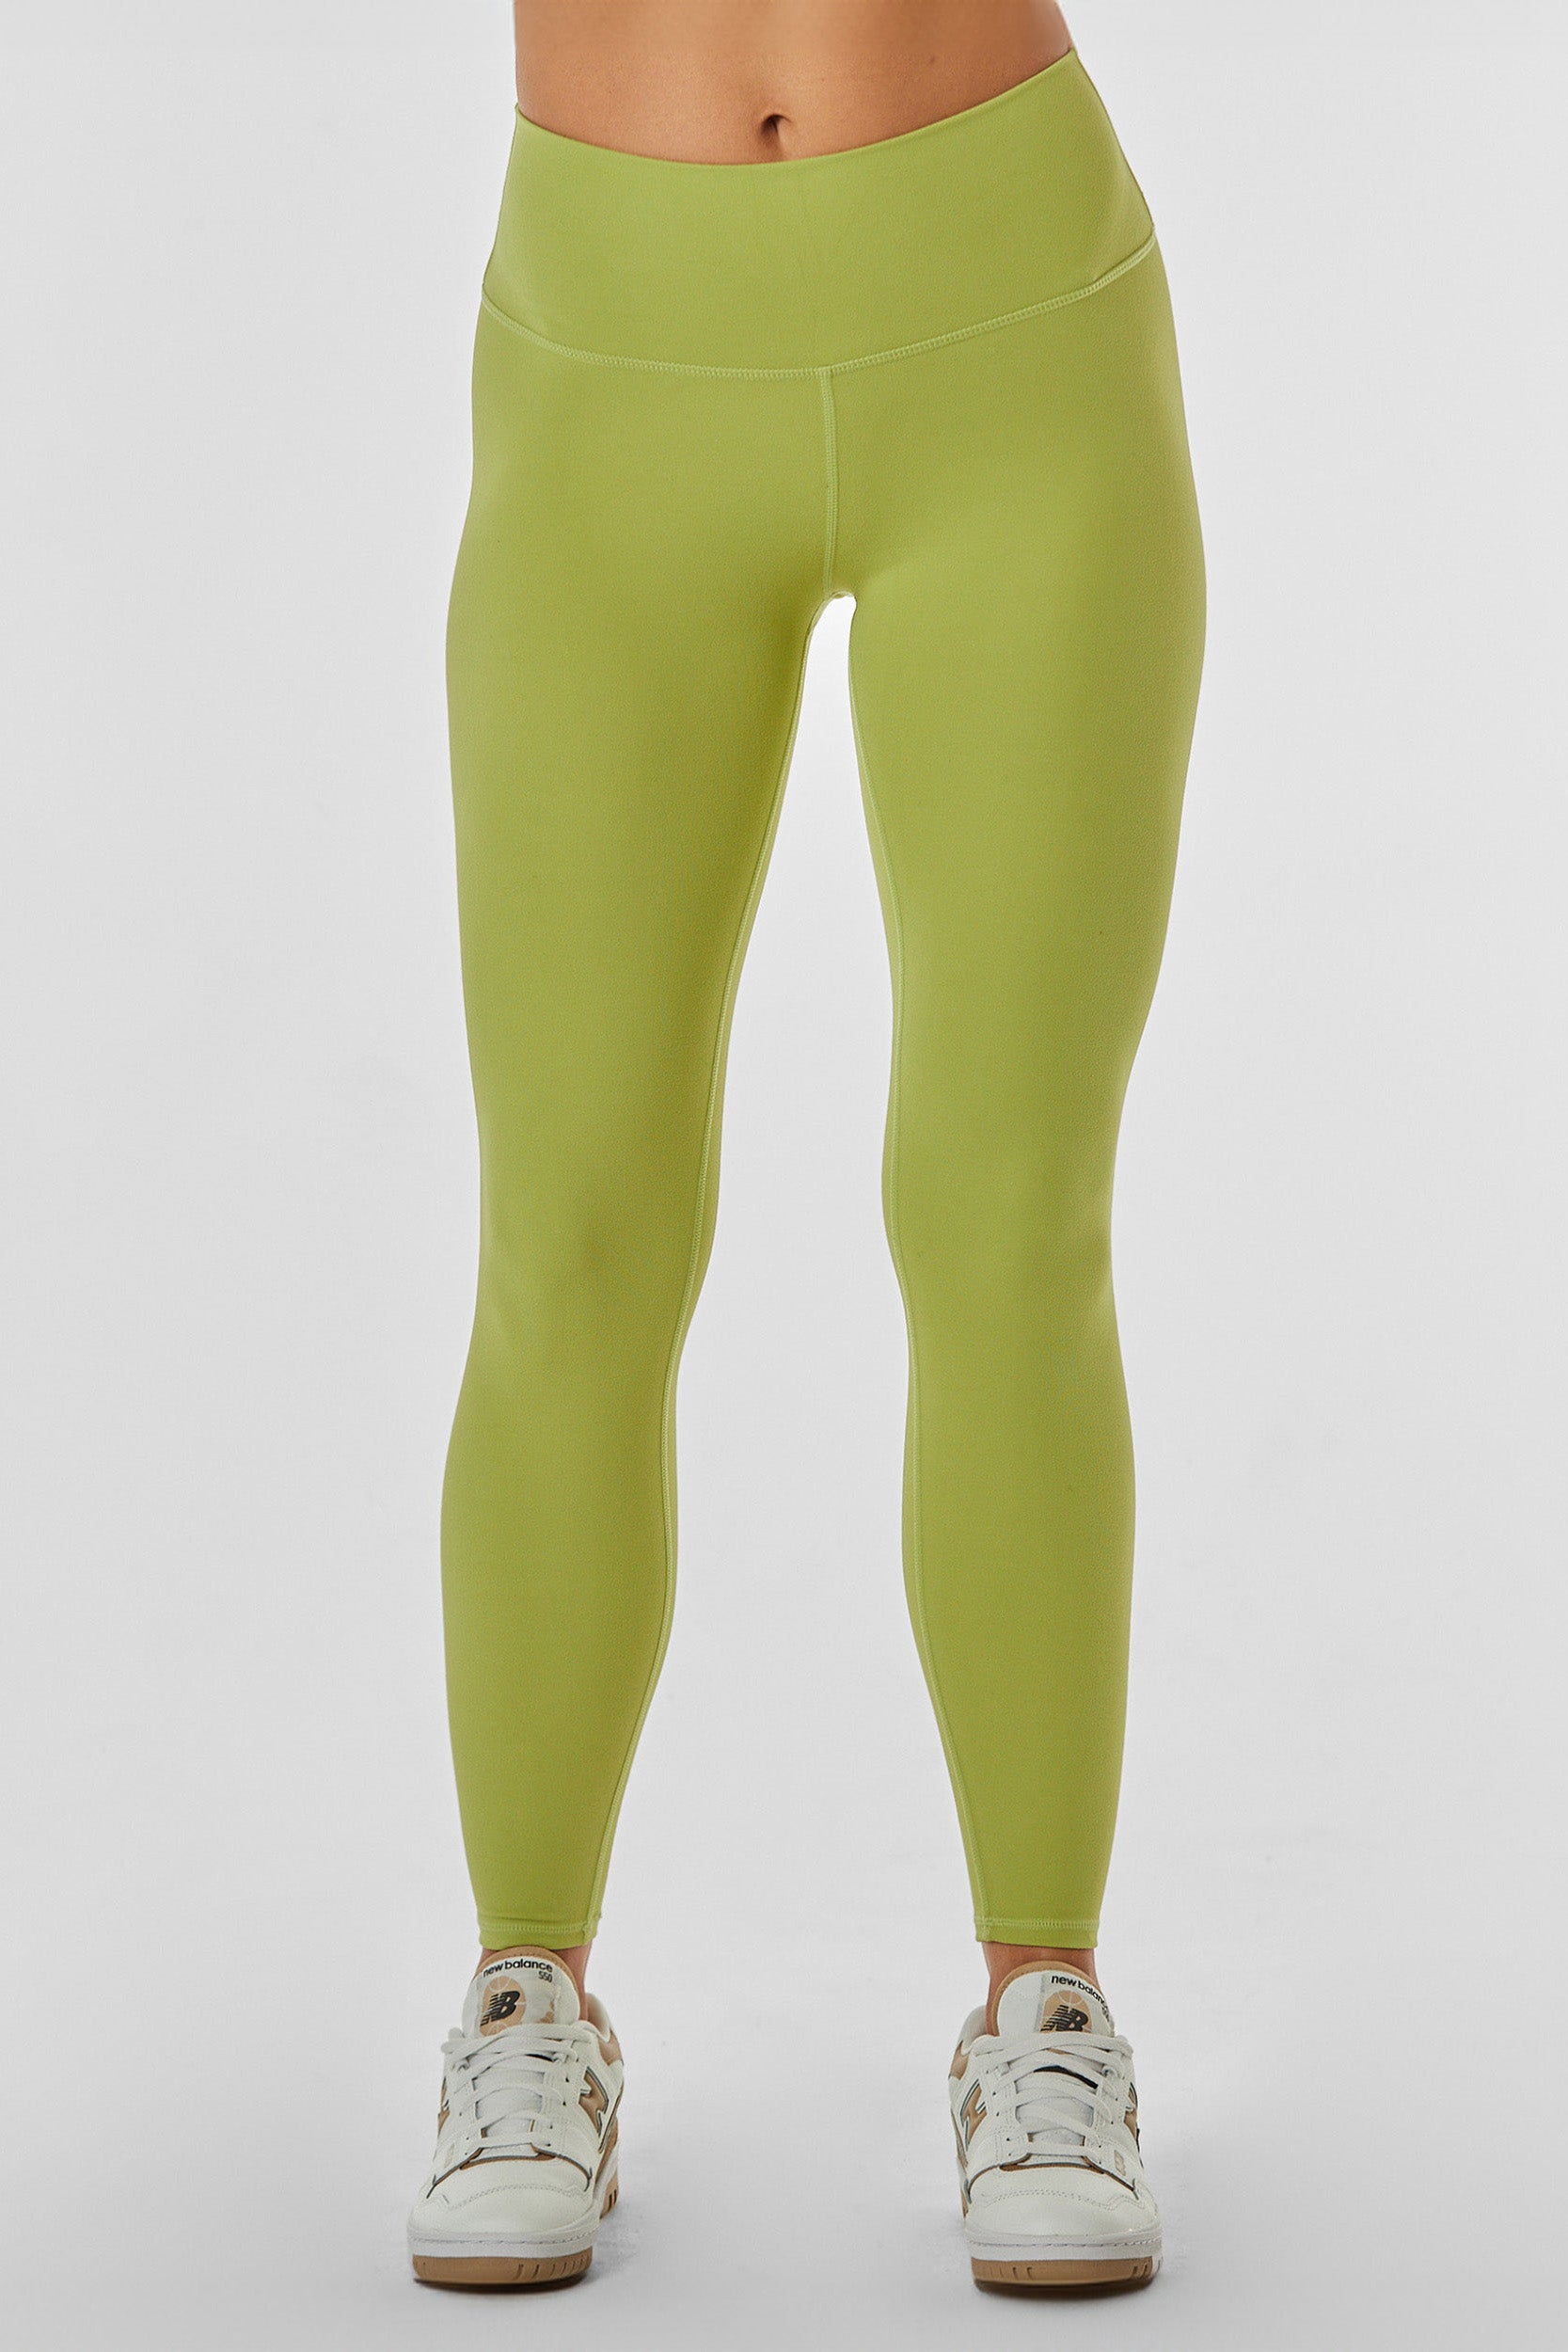 A person wearing the Limitless Legging in Matcha, which are light green, high-waisted, and sculpting, along with white sneakers. The photo is cropped from the waist down, showcasing the full length of the moisture-wicking leggings and shoes against a plain white background.